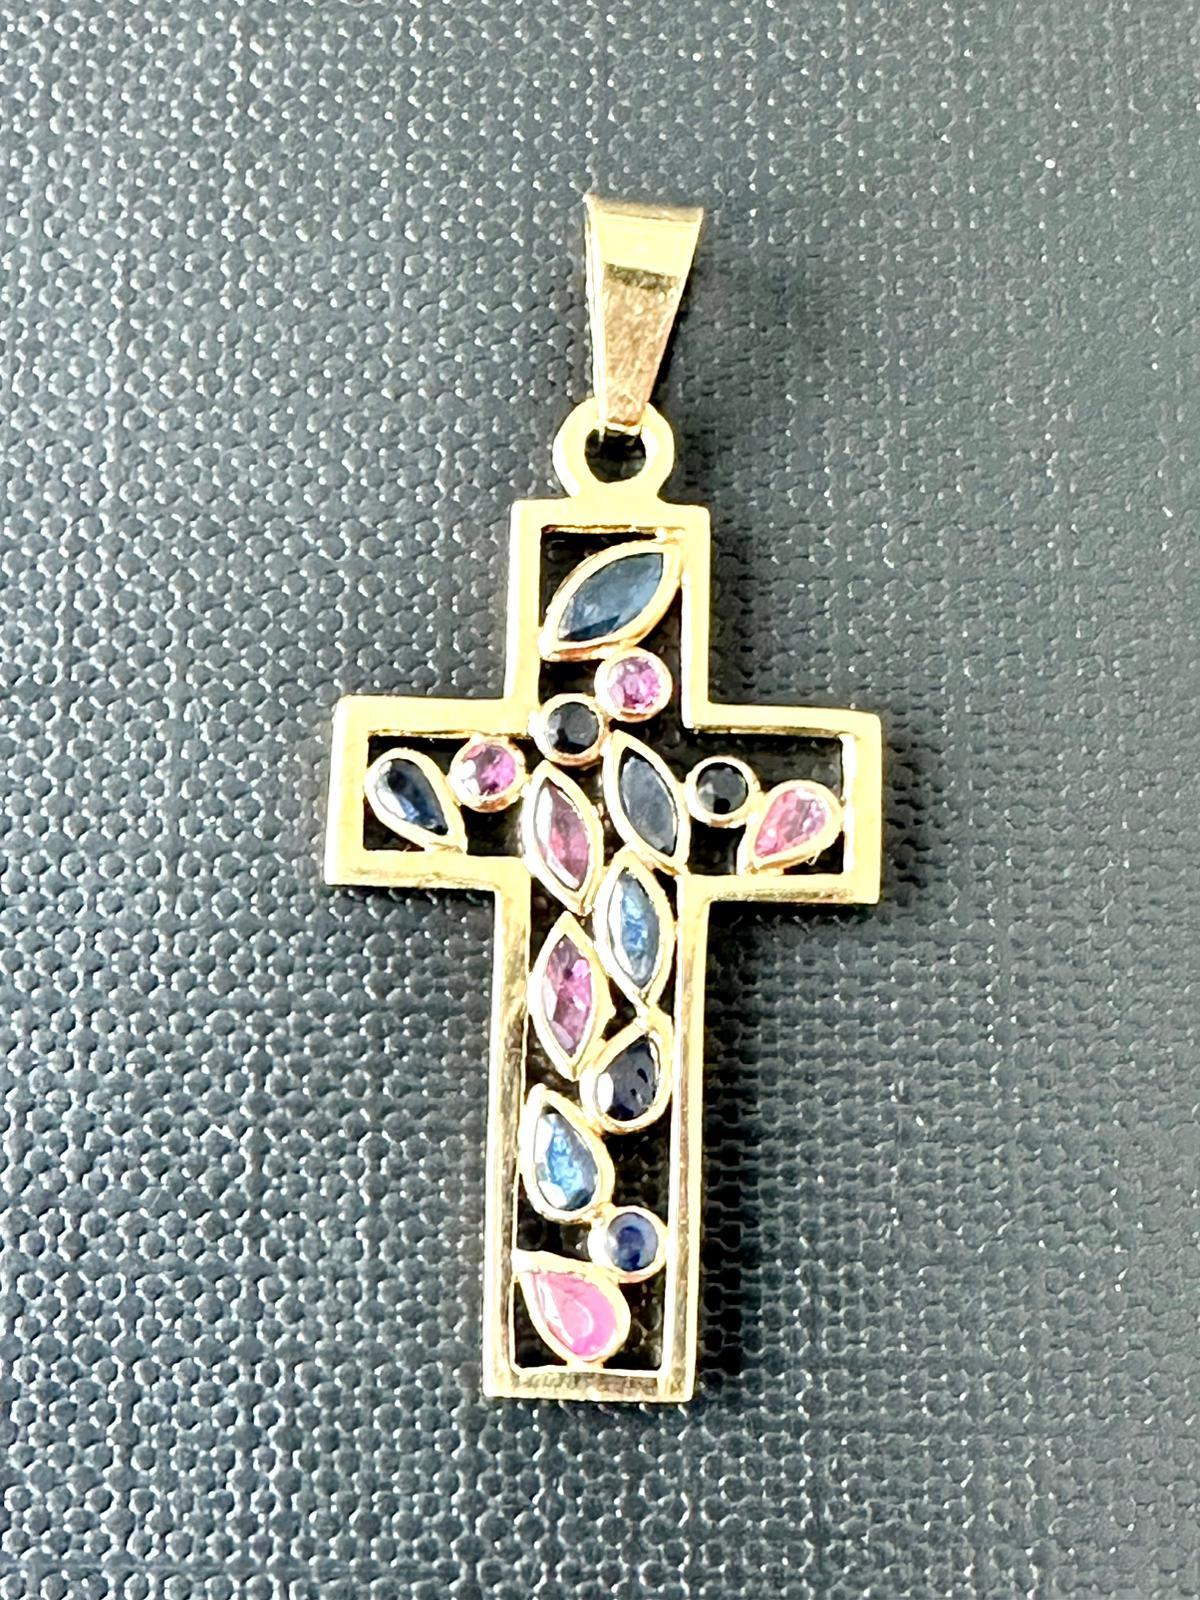 This delicate Cross has a beautiful and modern design due to the different colored Quartz: pink, blue and midnight blue. The stones have different cuts: brilliant, pear and marquise. Each stone has its own setting to better highlight its color. The